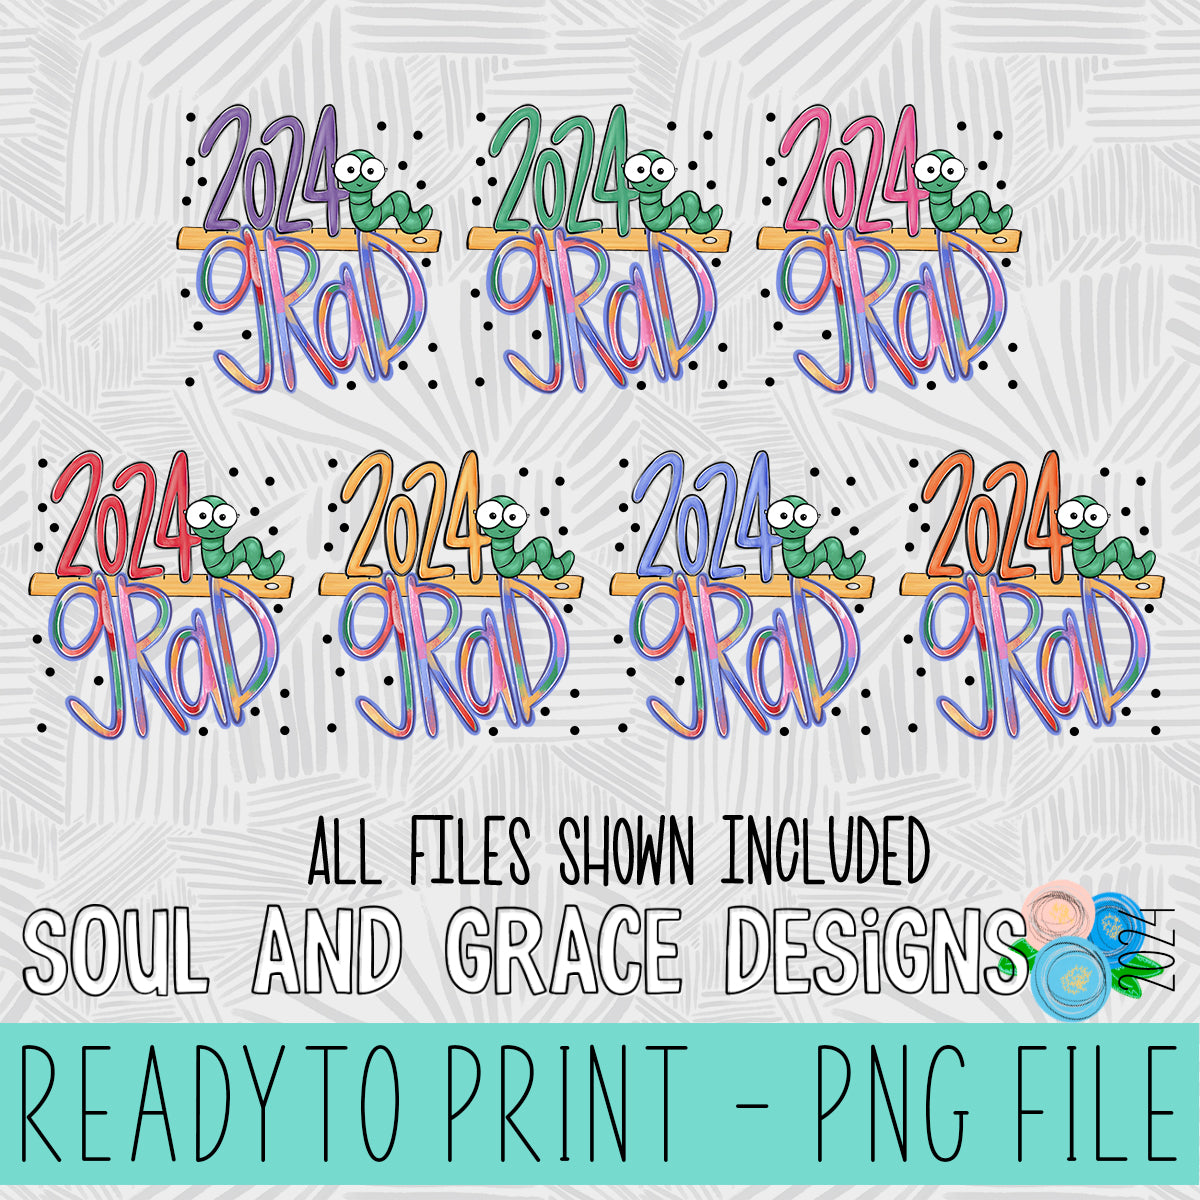 Worm Grad Bundle [all files included]